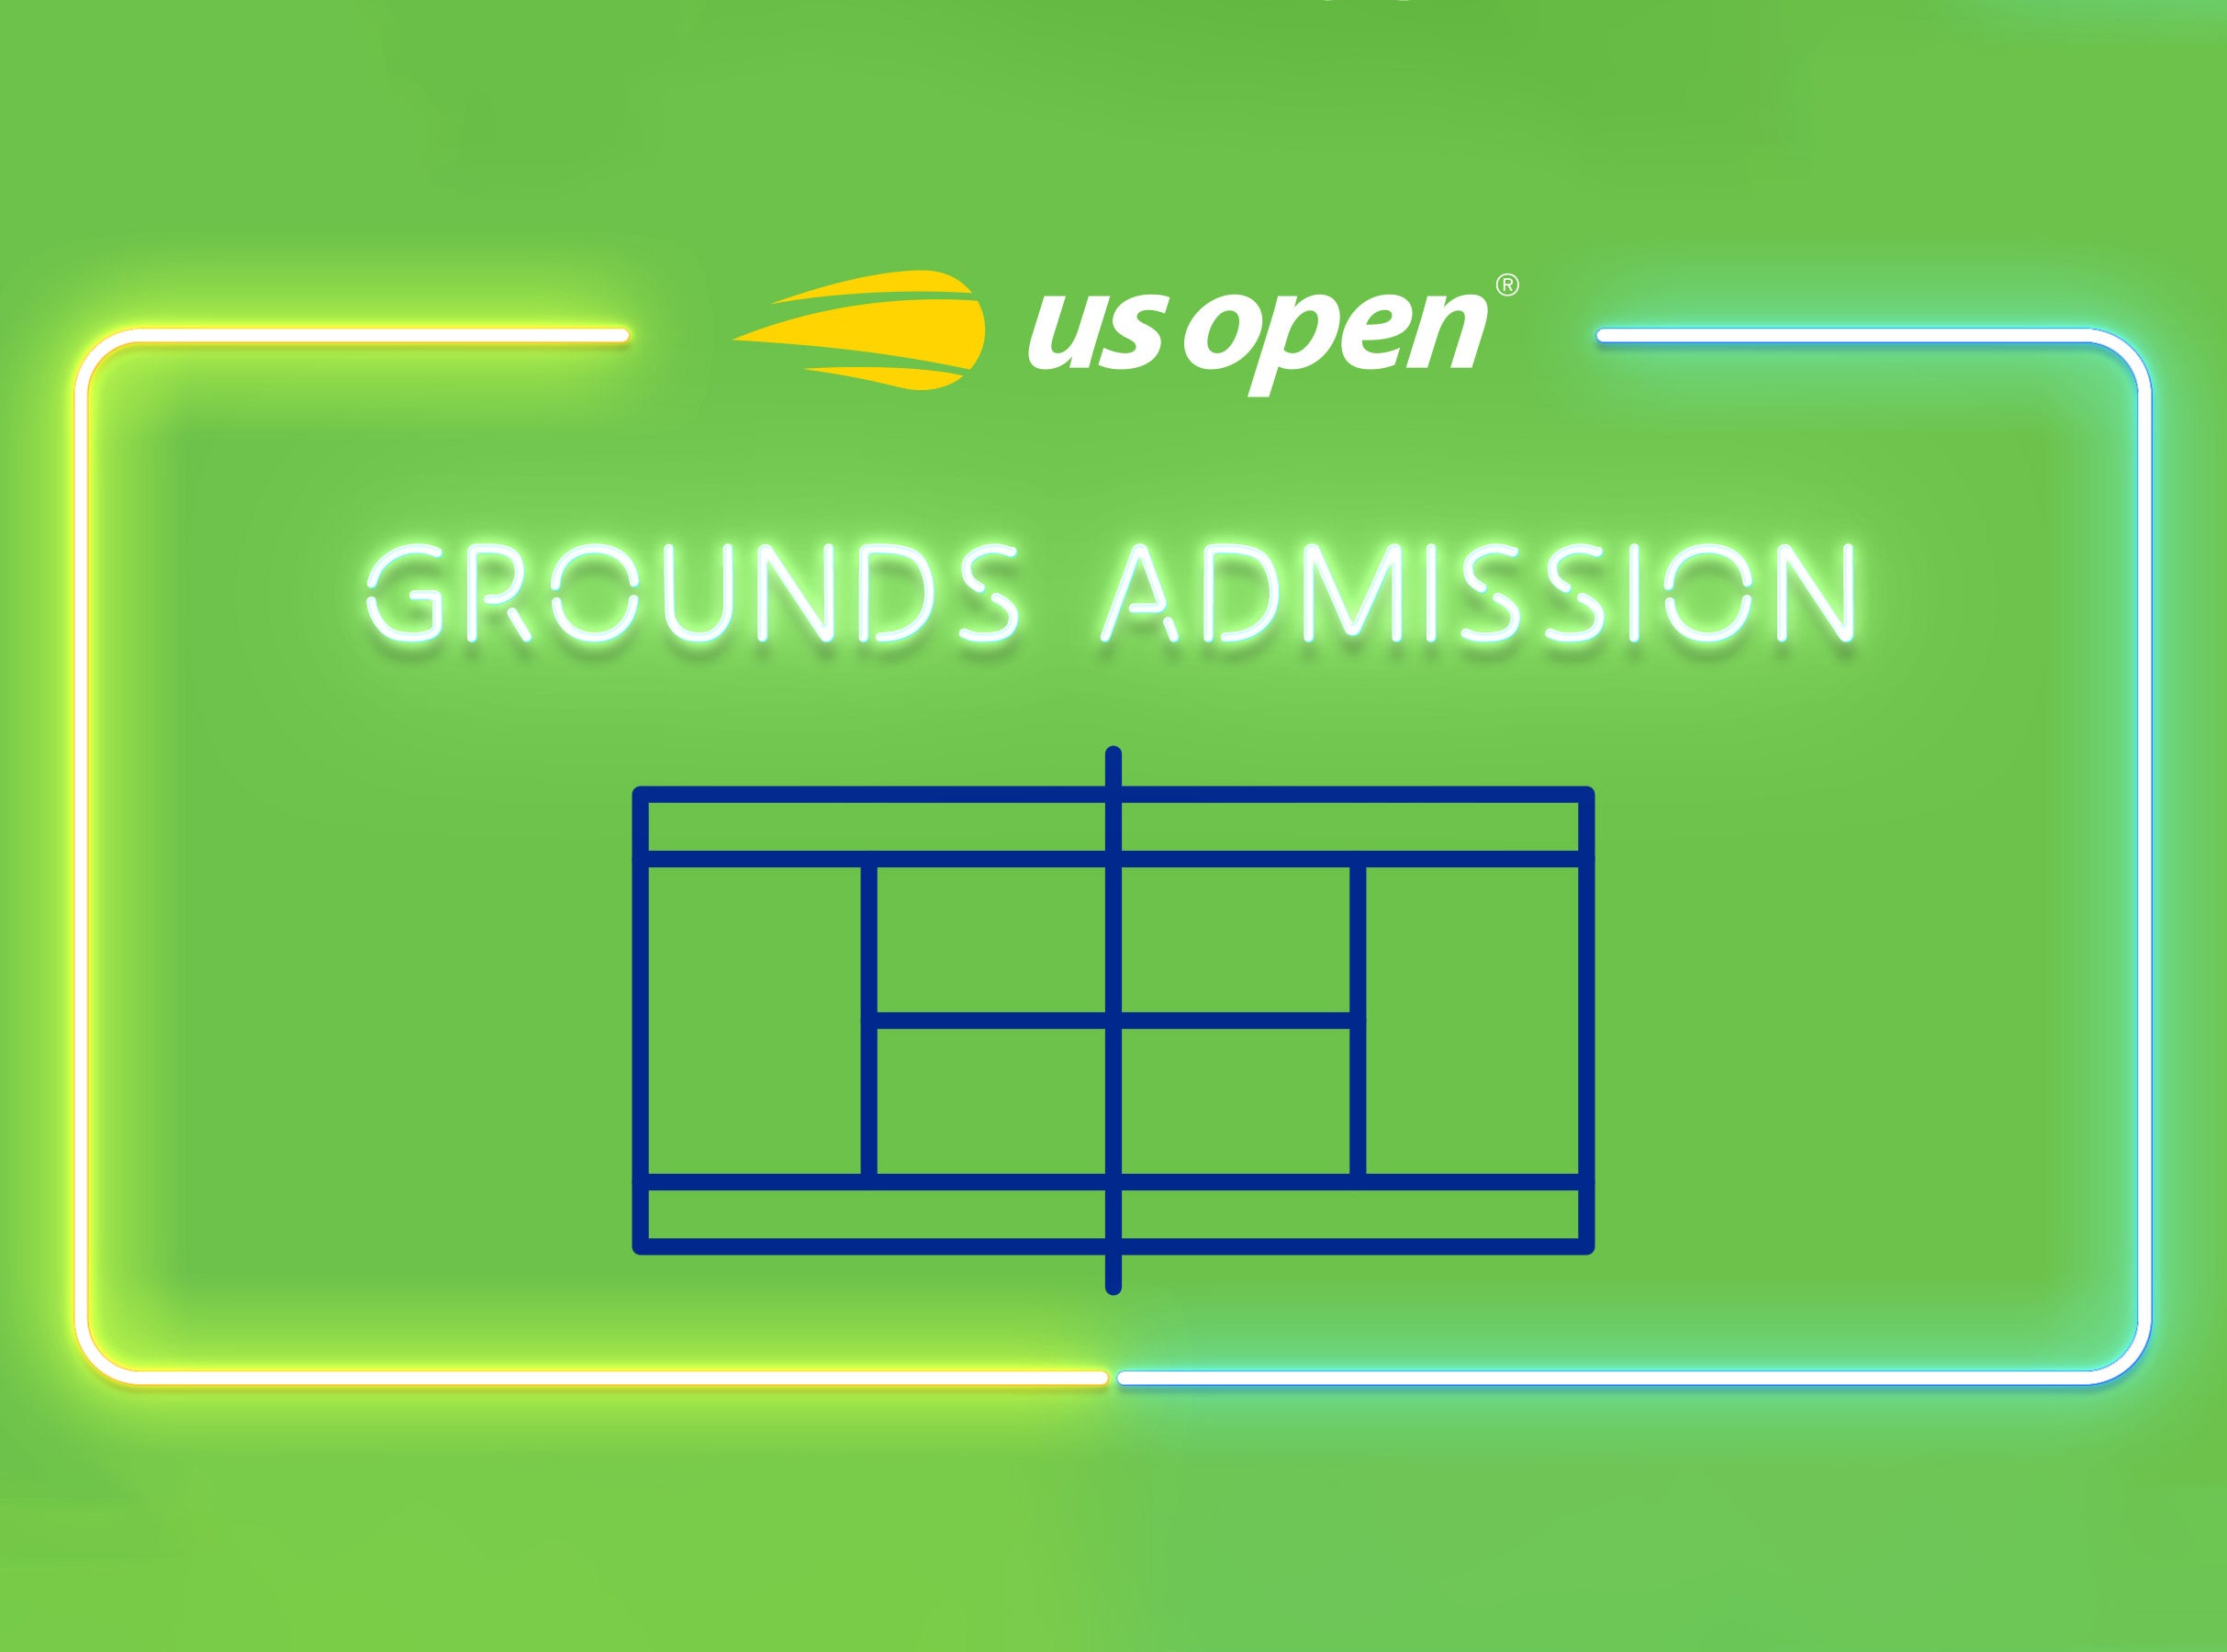 1st Round Men's / Women's in Flushing promo photo for American Express® Early Access presale offer code